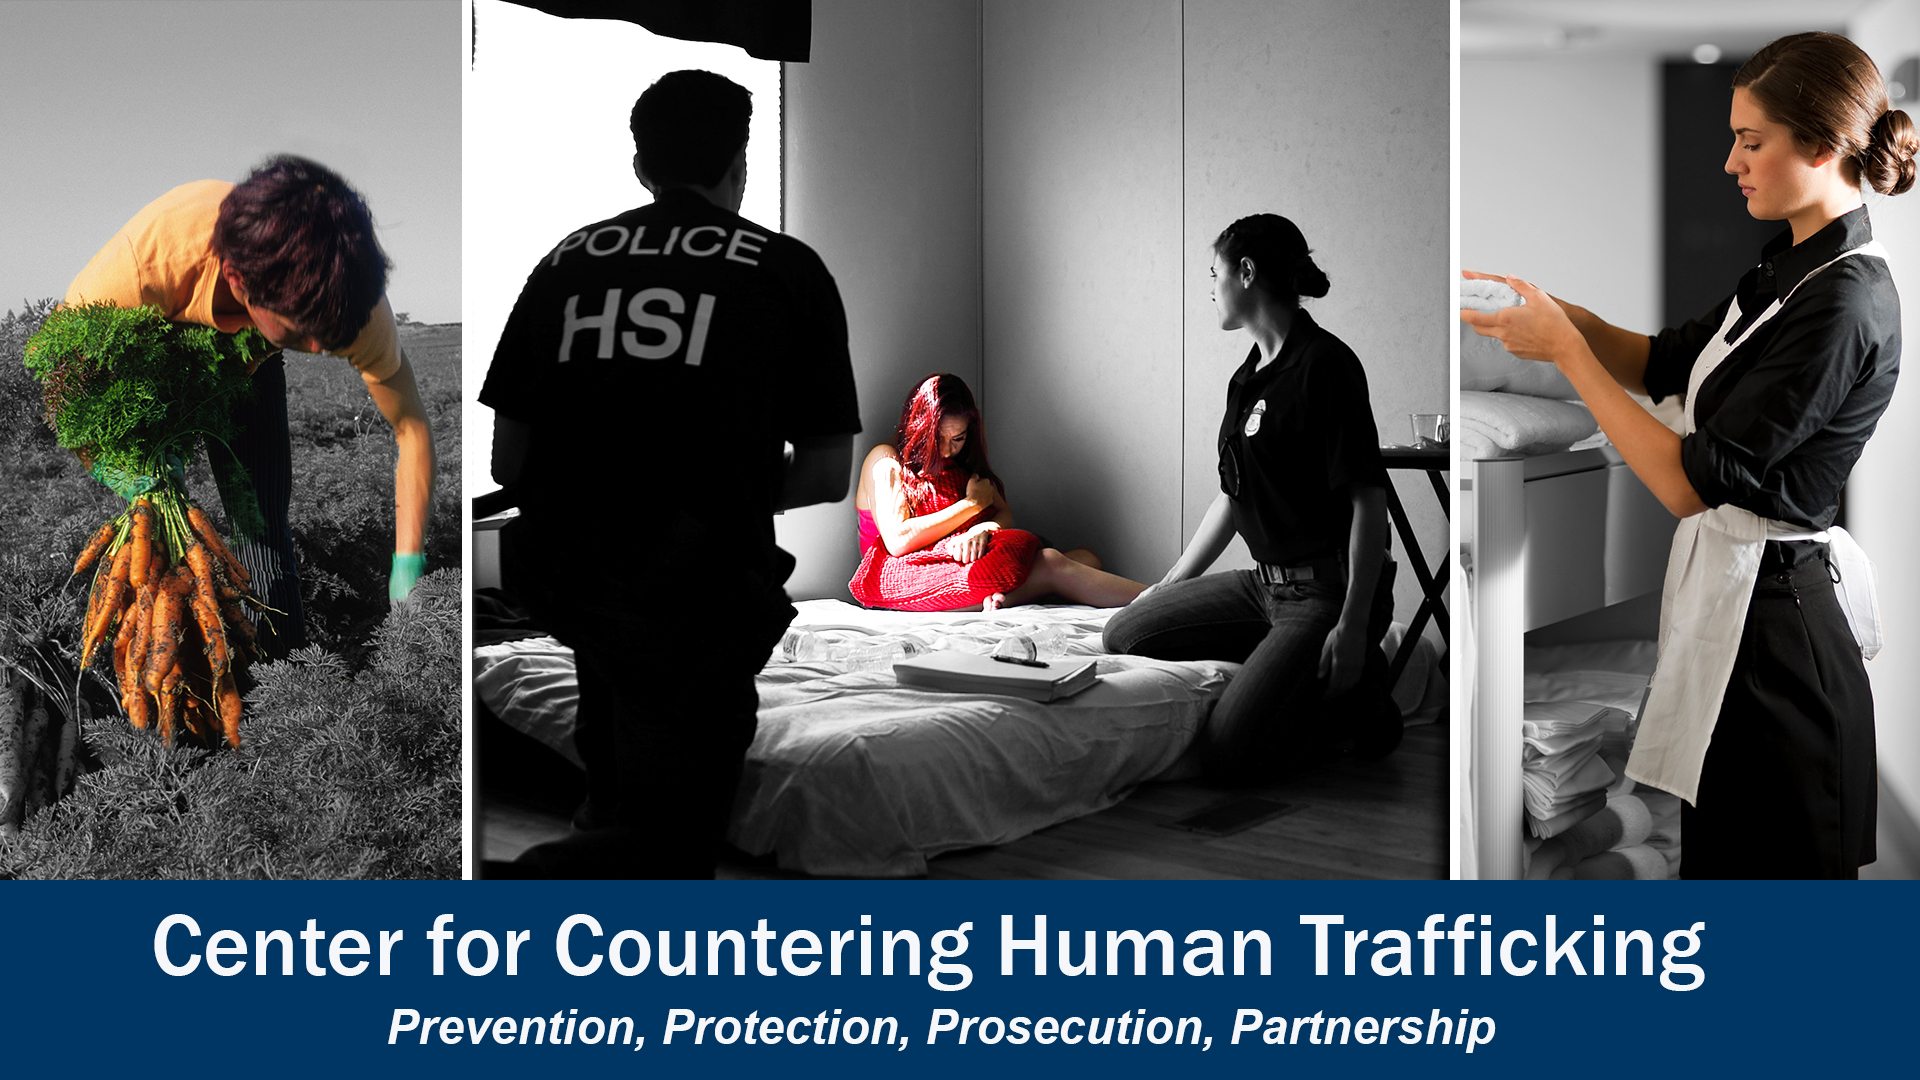 https://www.ice.gov/assets/features/human-smuggling-trafficking/ccht/cchtBanner.jpg